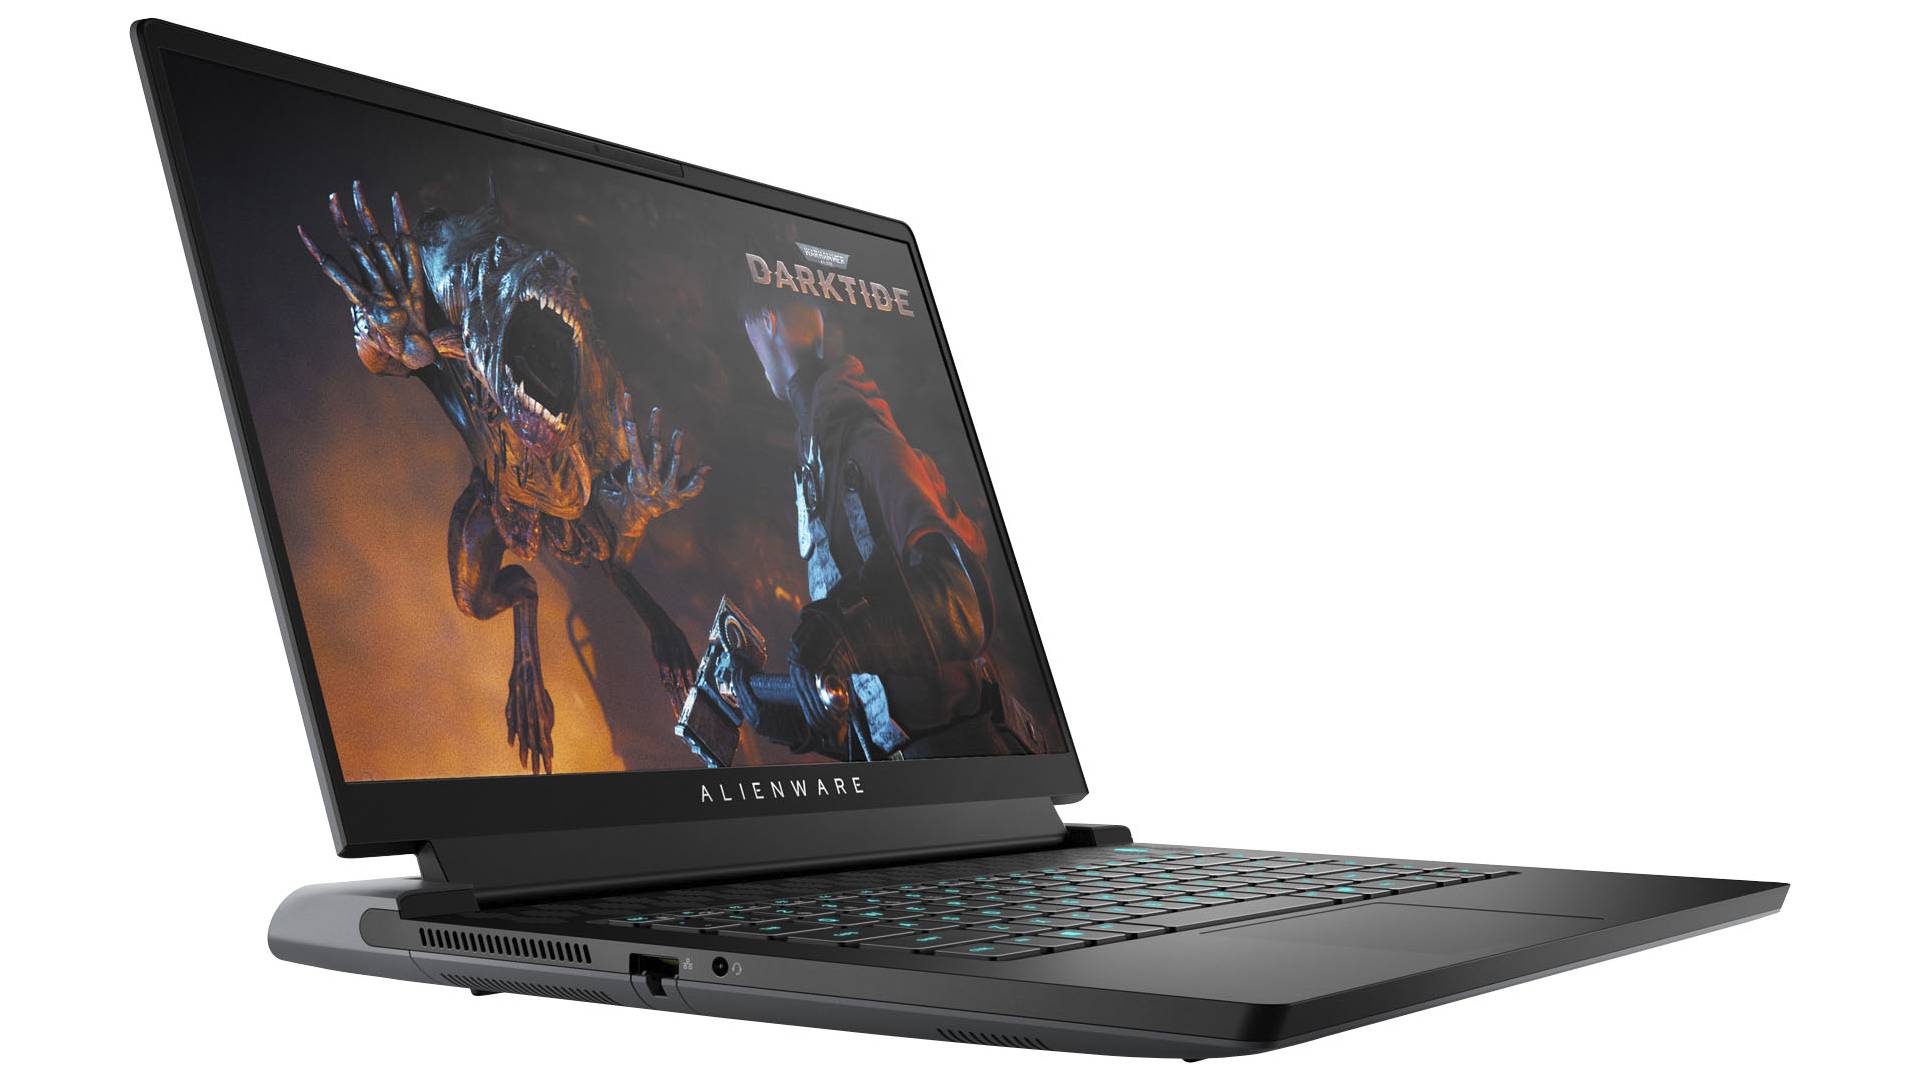 Grab $400 off Dell's Alienware M15 RTX 3070 gaming laptop at Best Buy